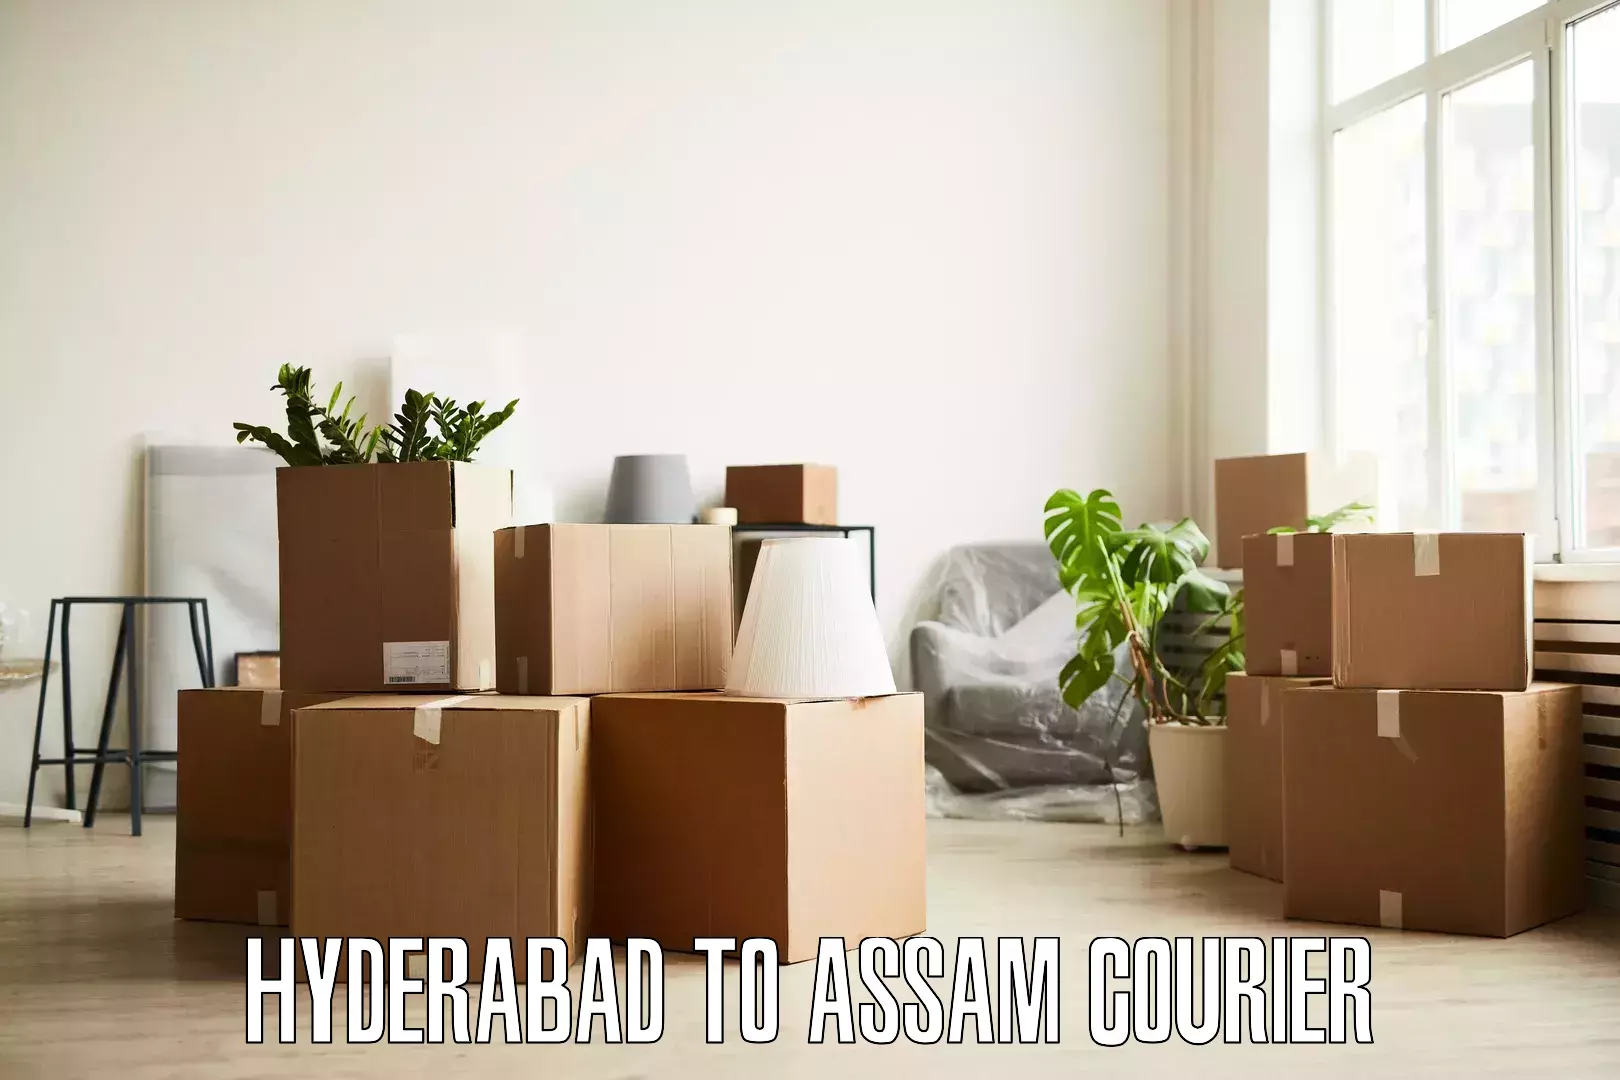 Professional movers and packers Hyderabad to Guwahati